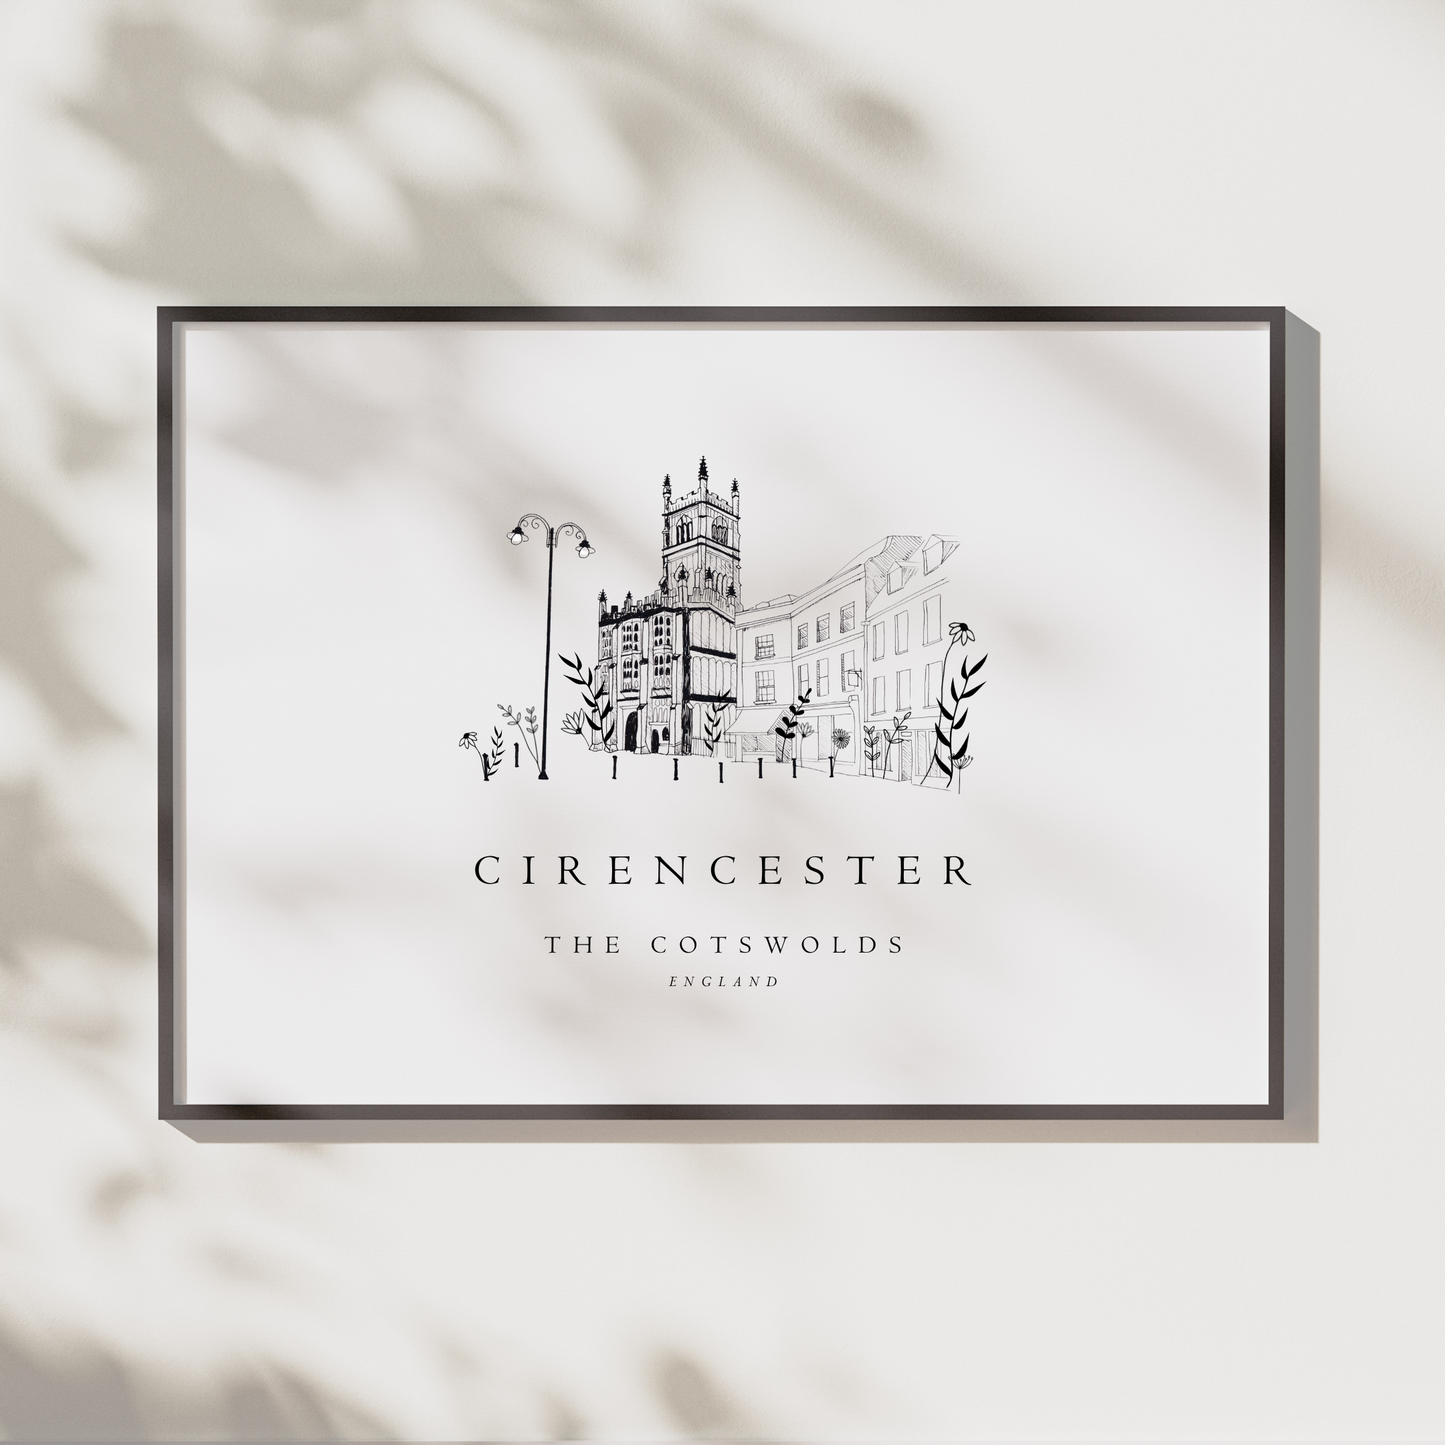 Cirencester Cotswolds Print | St. John The Baptist Church | The Cotswolds | A4 or A5 - The Cotswold Illustrated Company